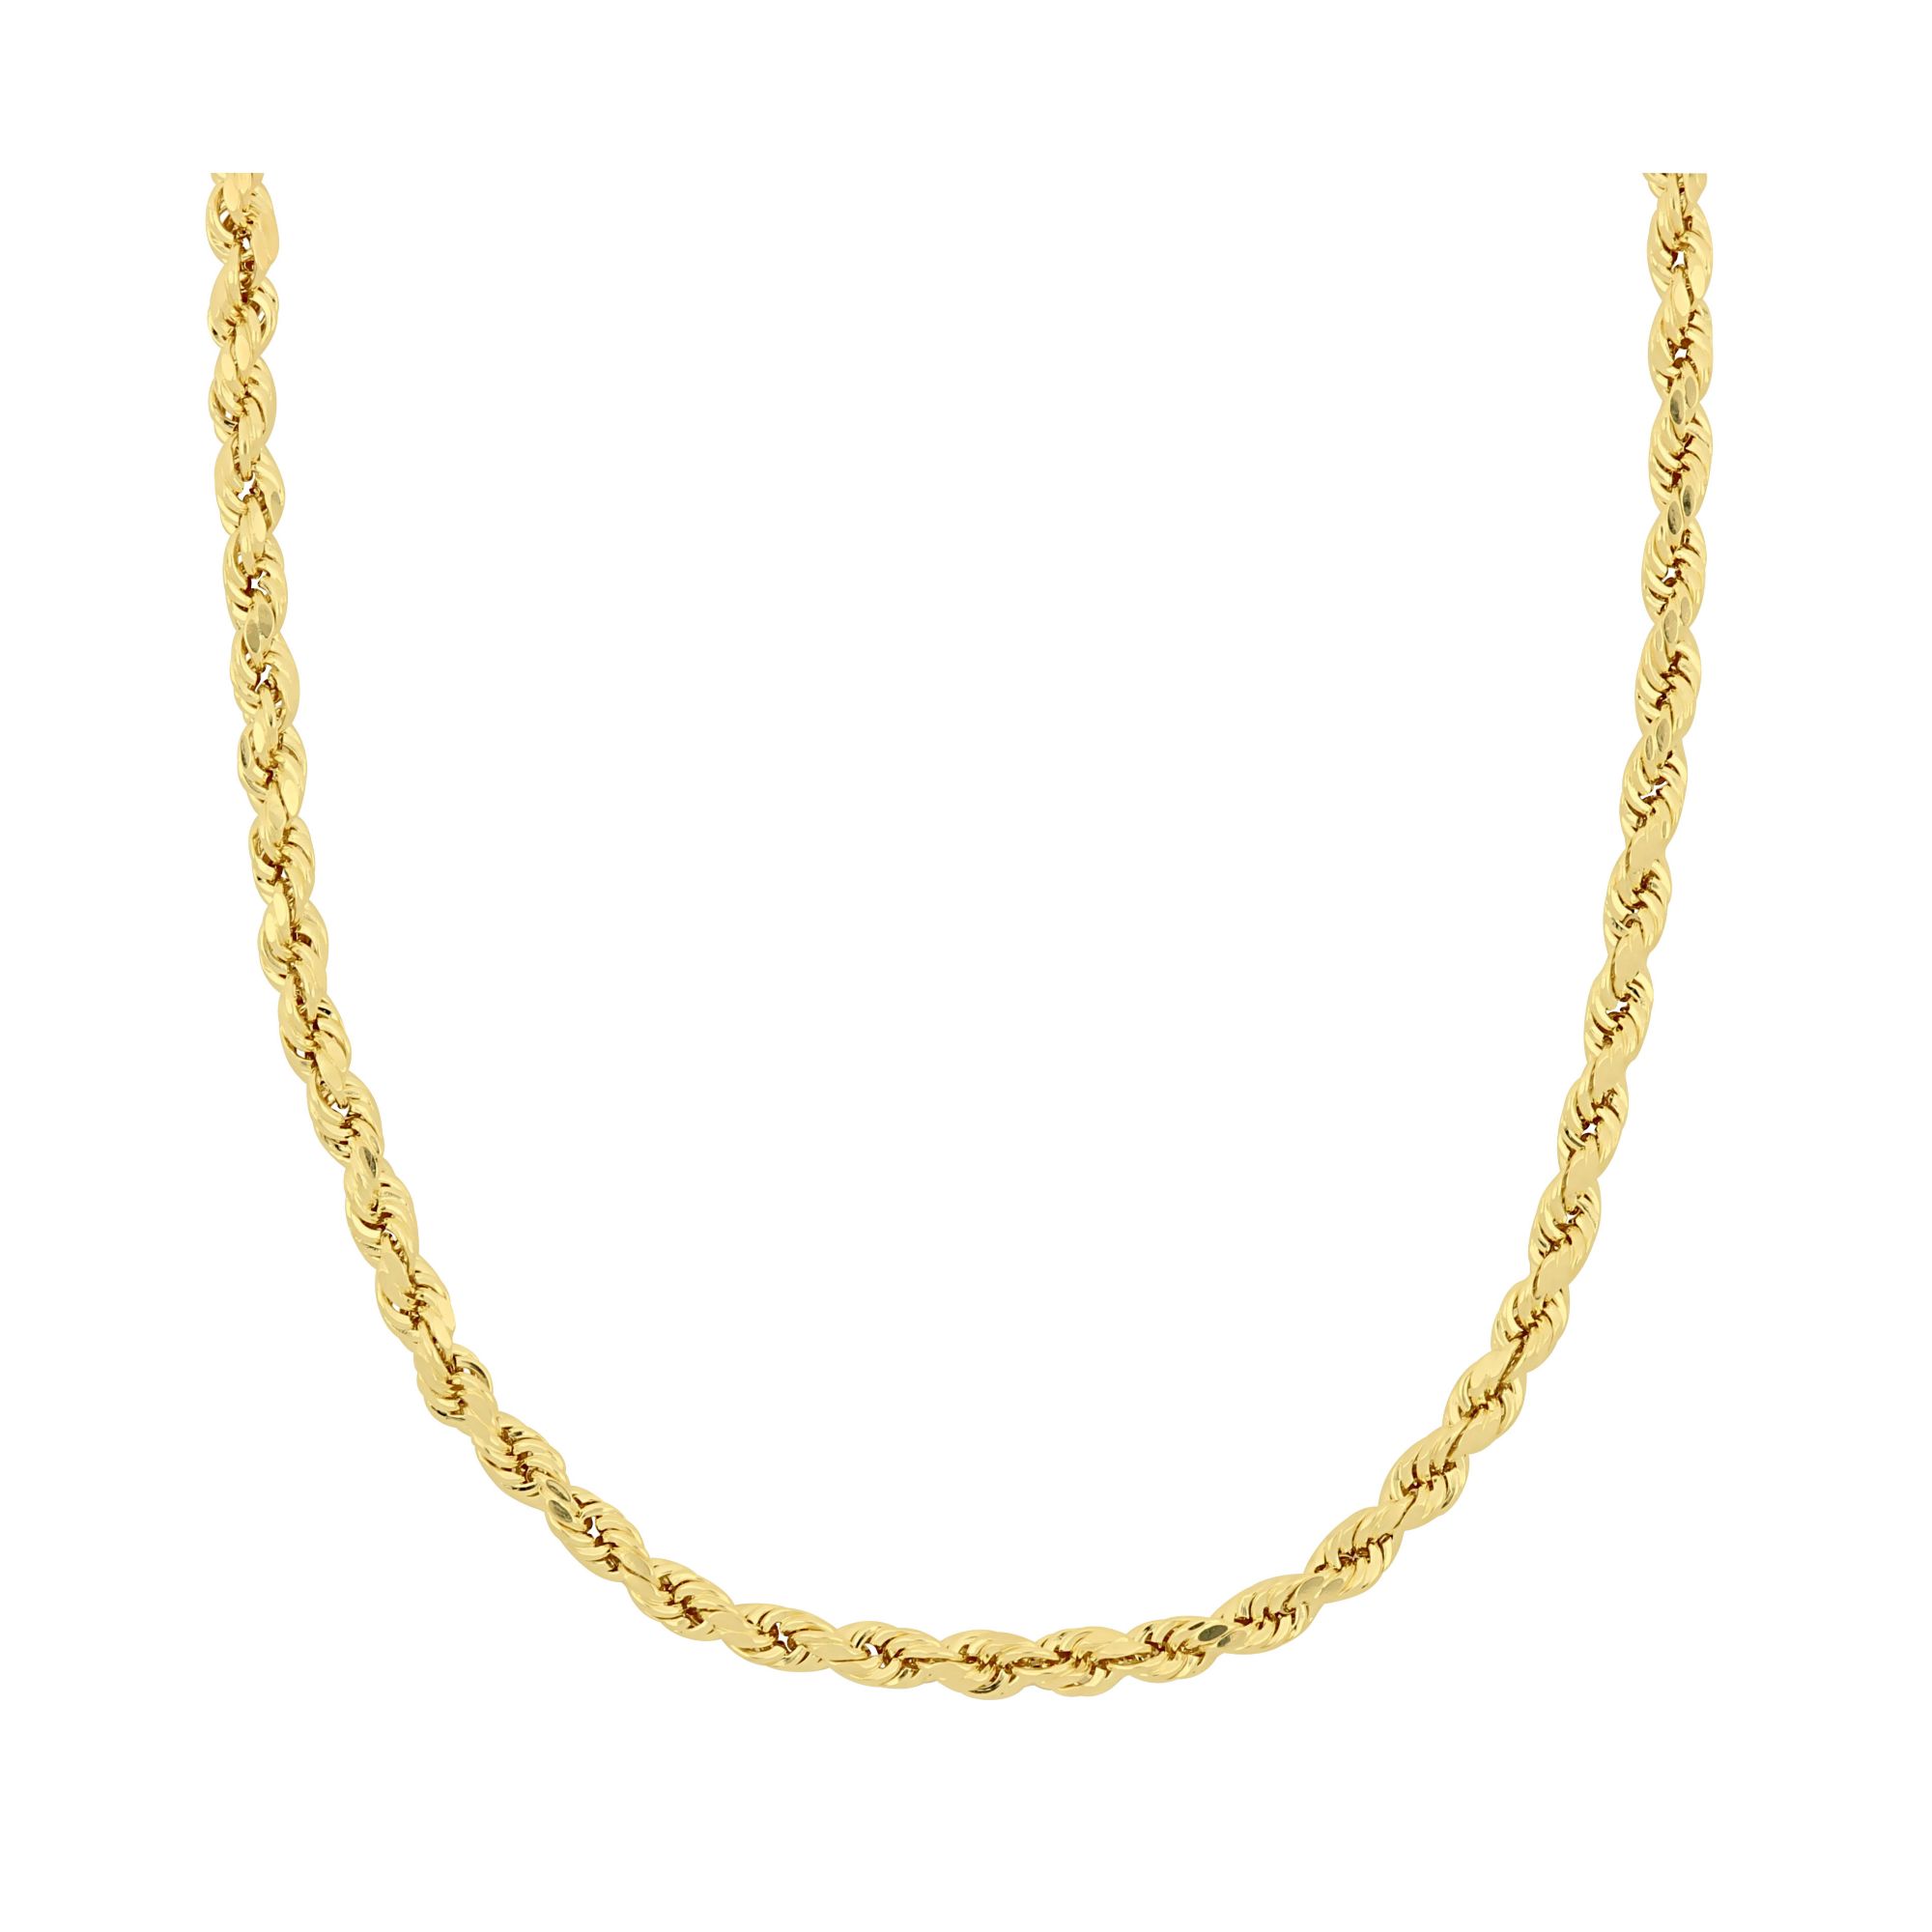 Men's 3mm Rope Chain Necklace in 14k Yellow Gold - 22&quot;